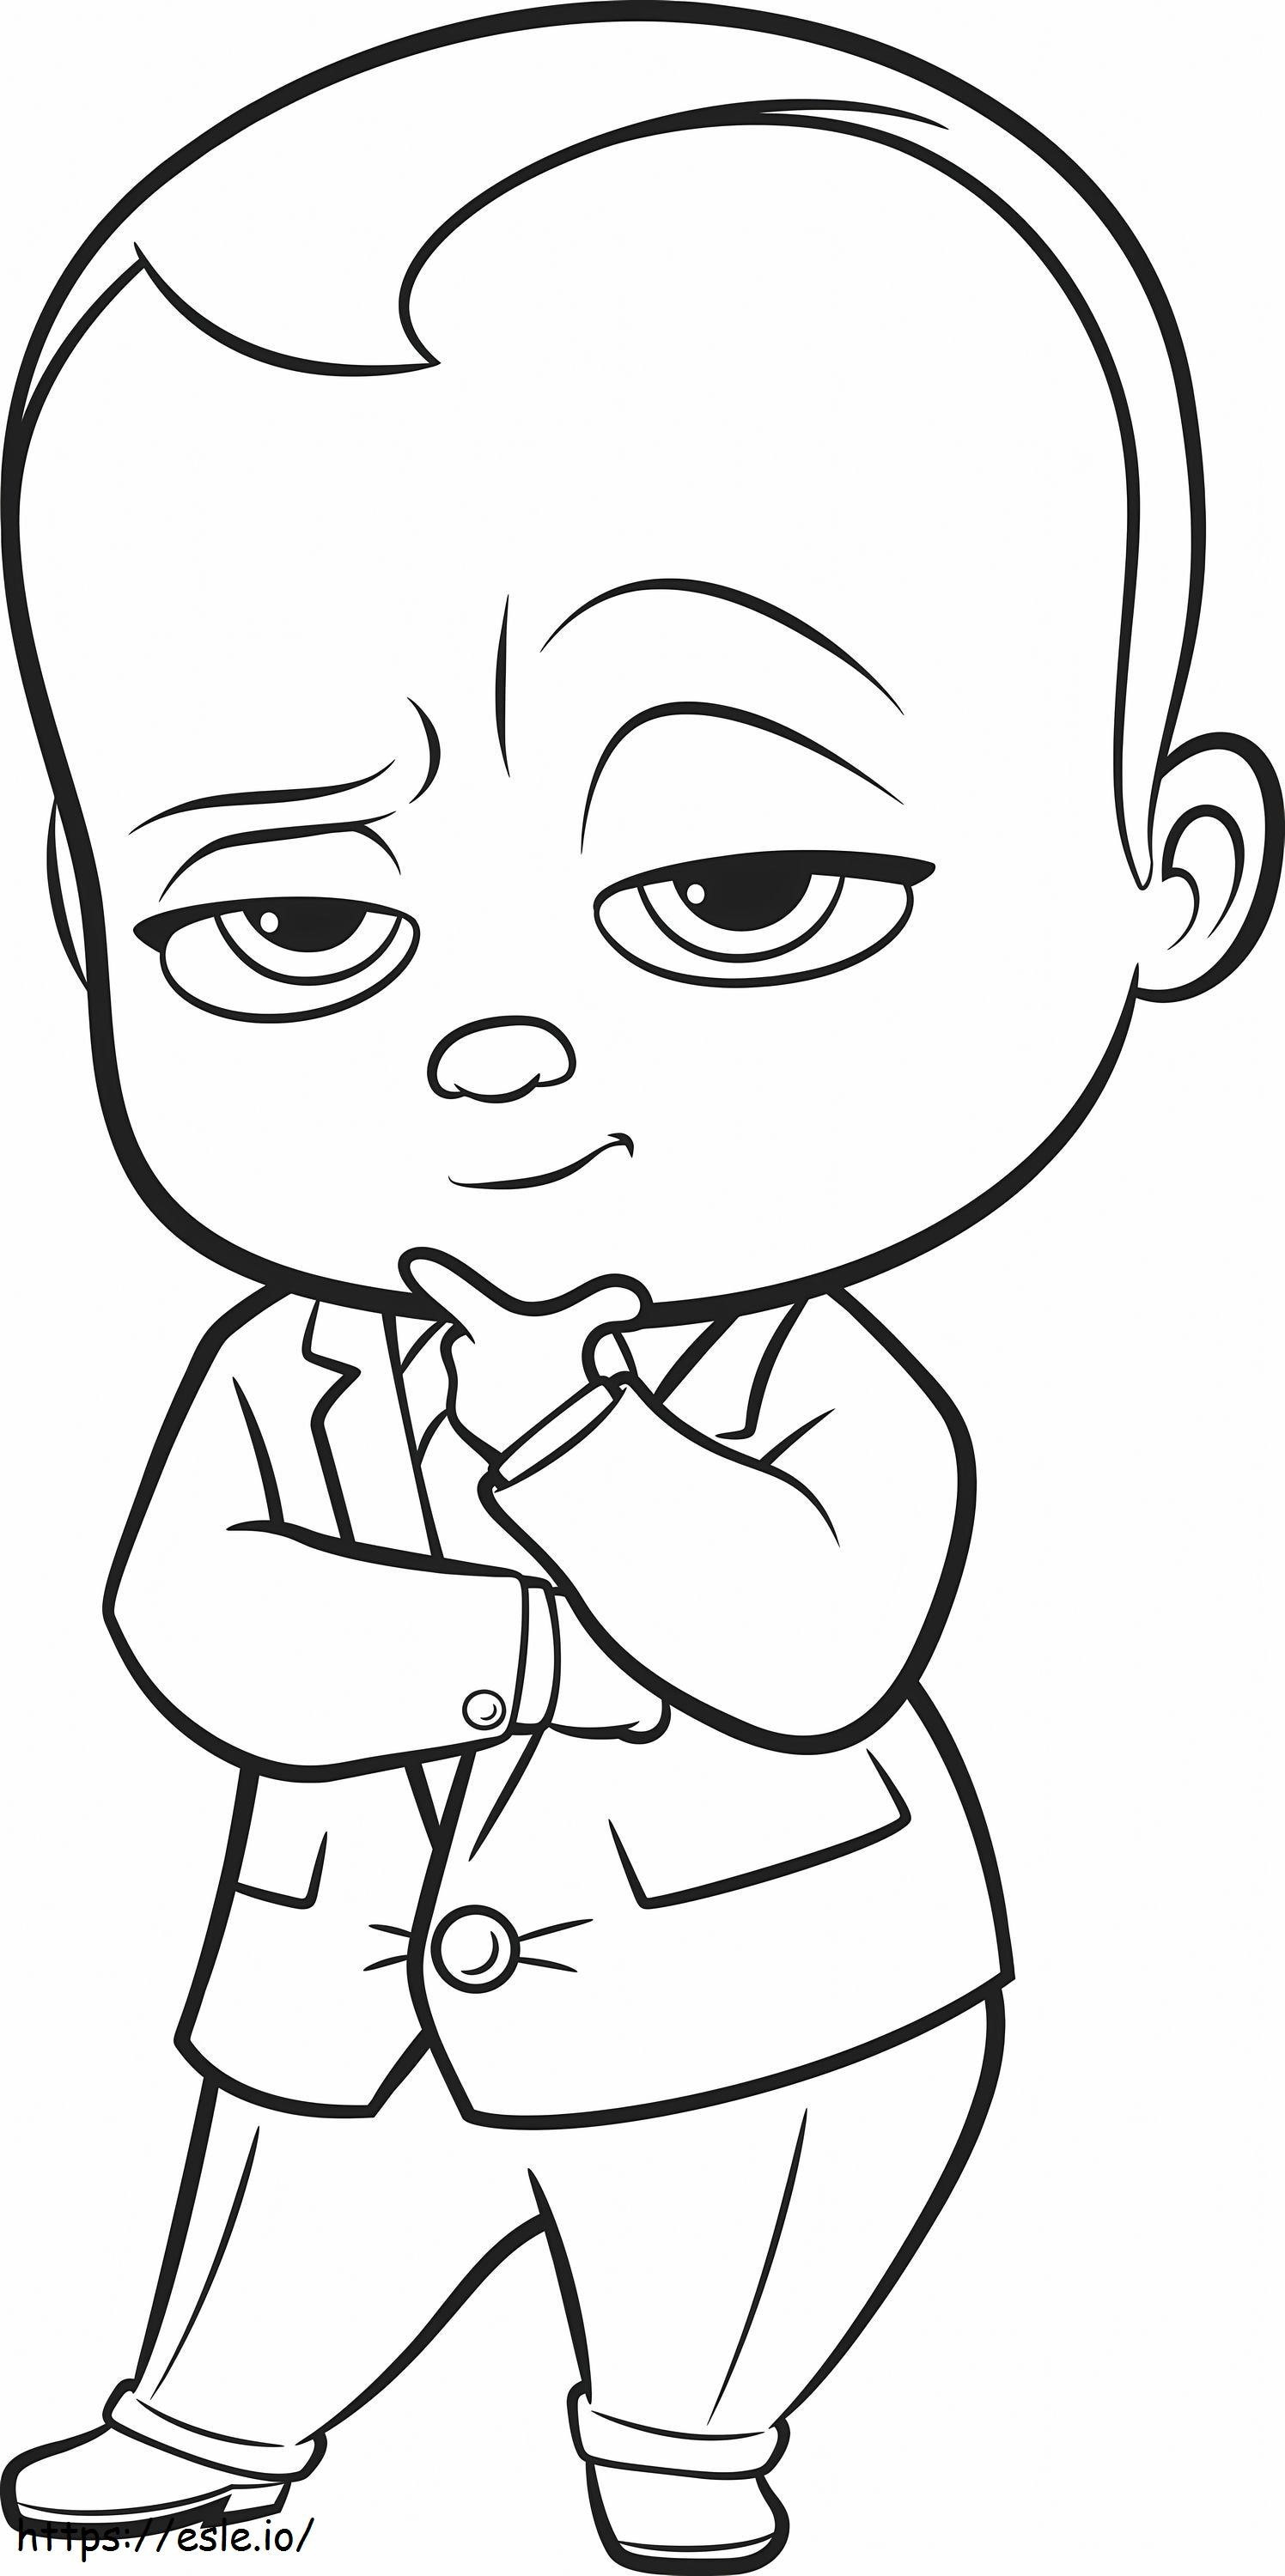 1530933683 Cool Boss Baby A4 coloring page